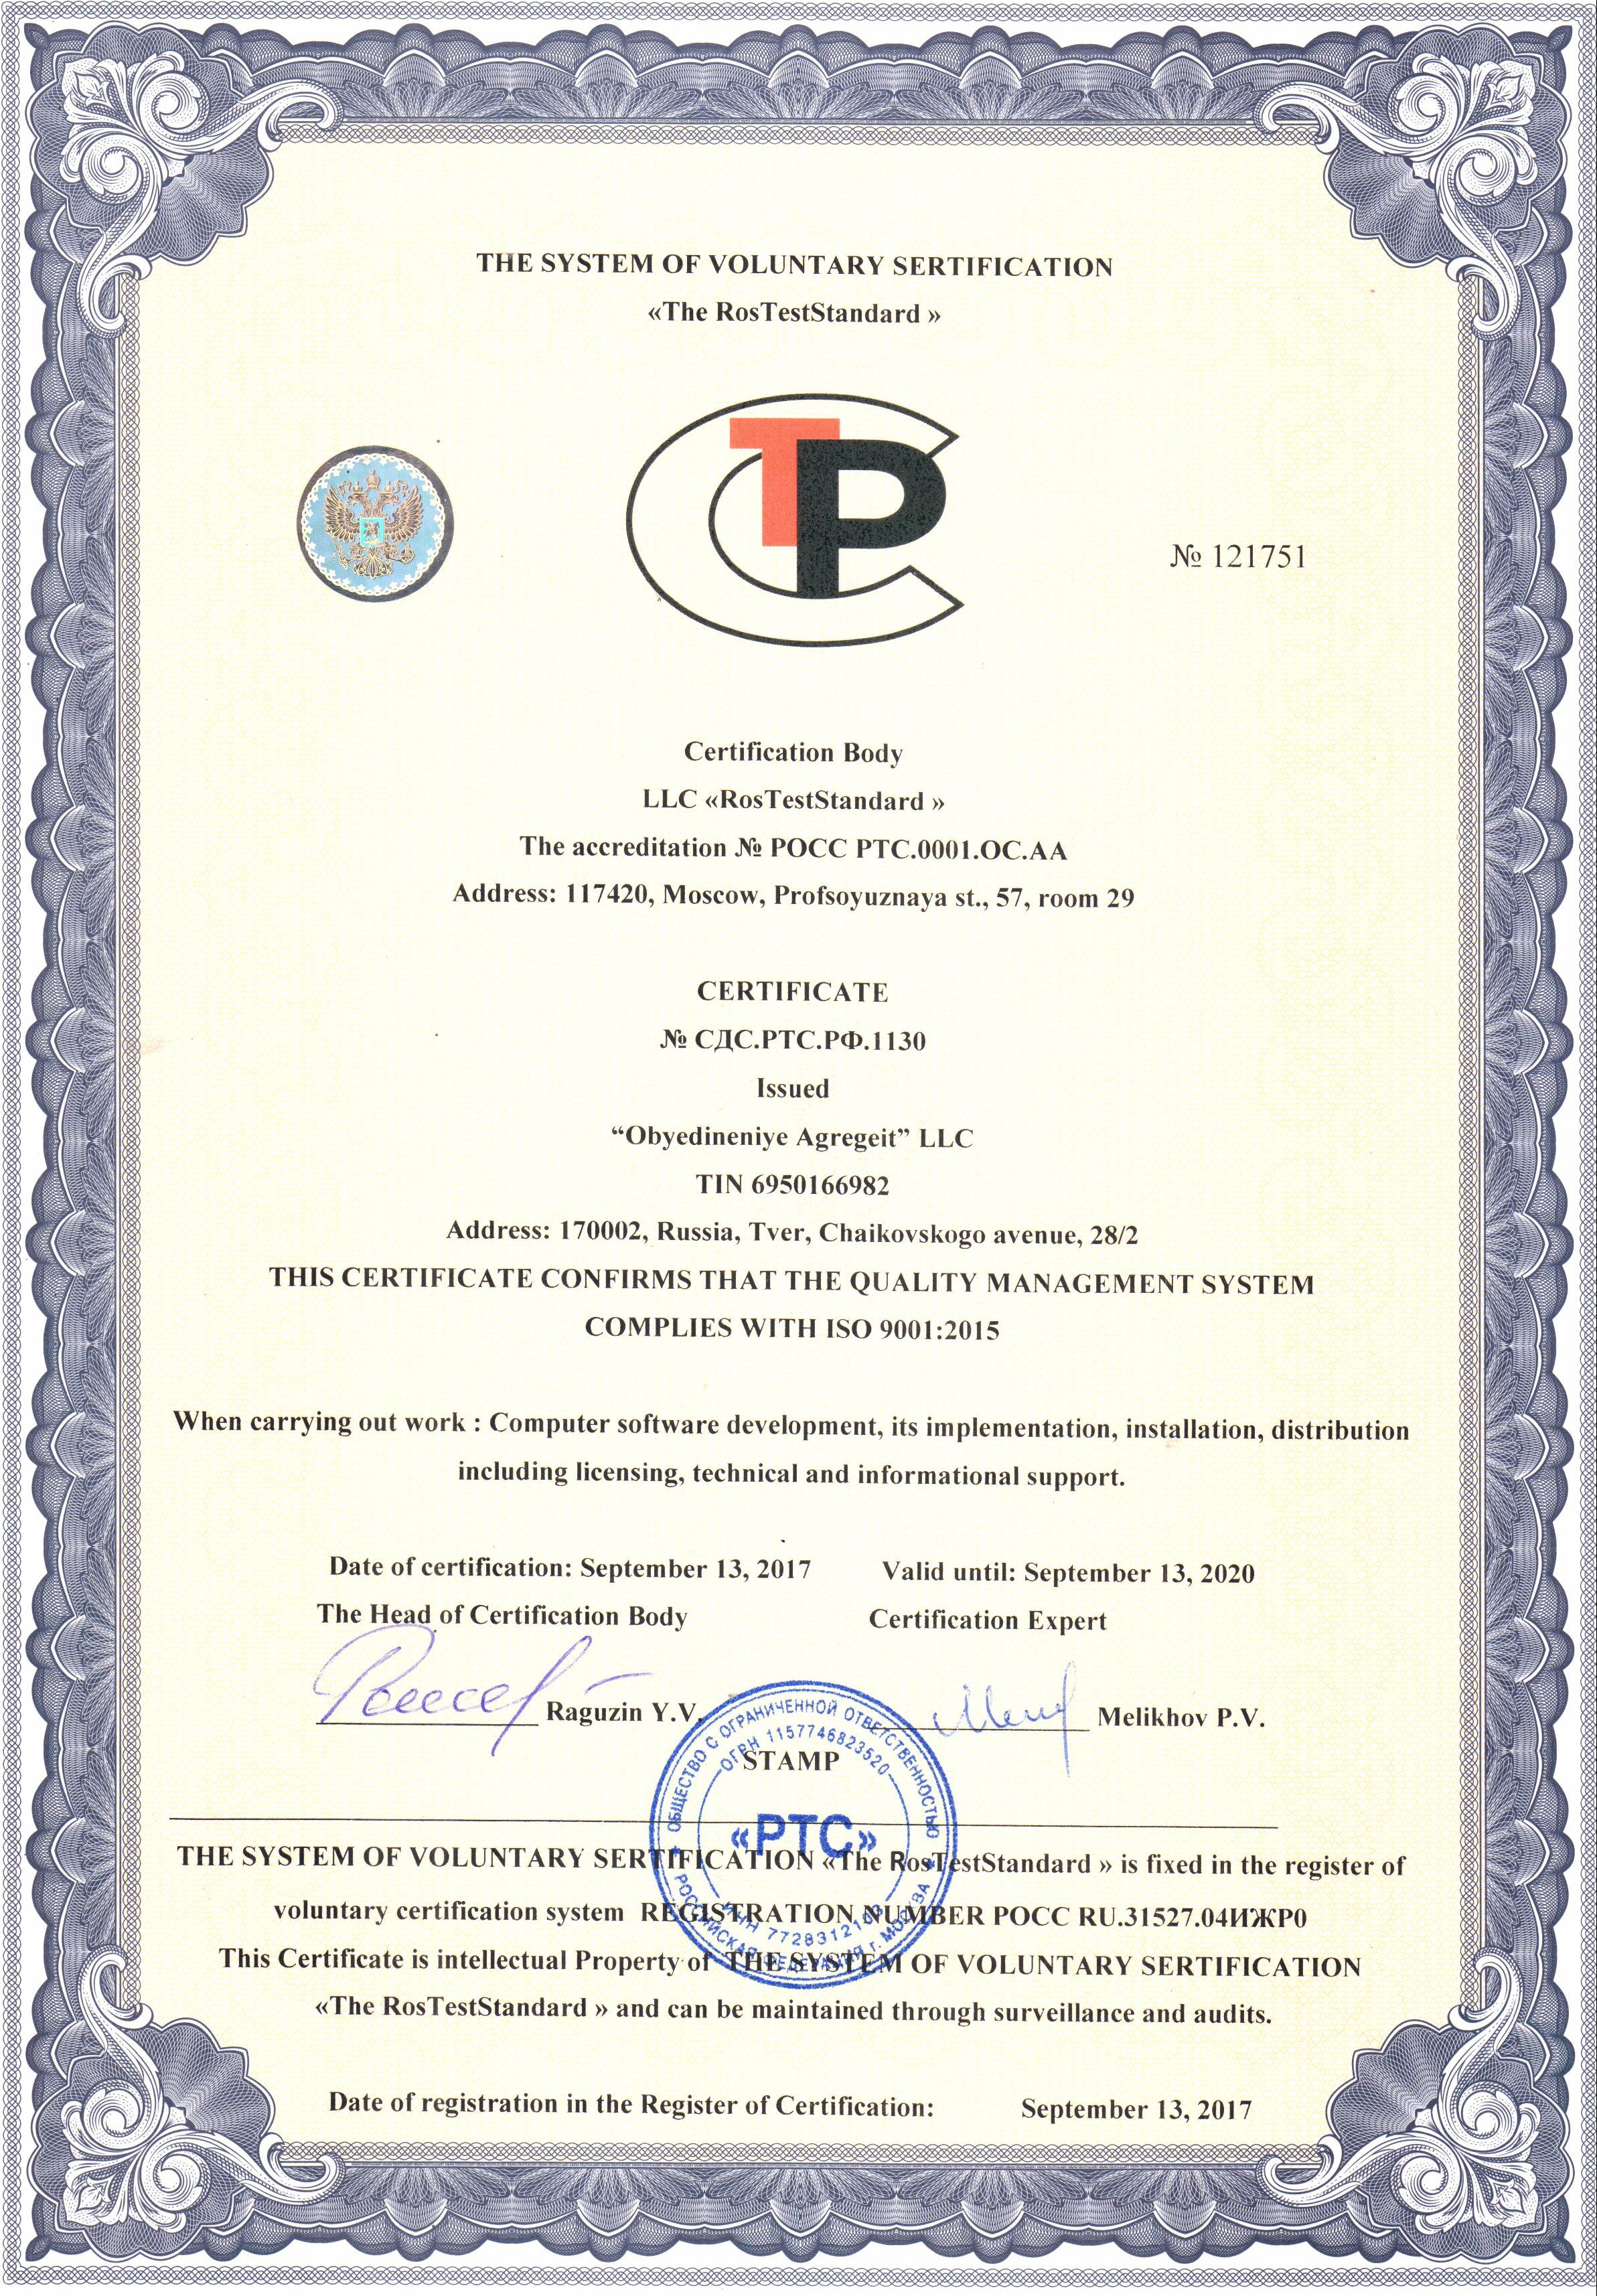 Tibbo Systems has getting ISO 9001:2015 Certificate